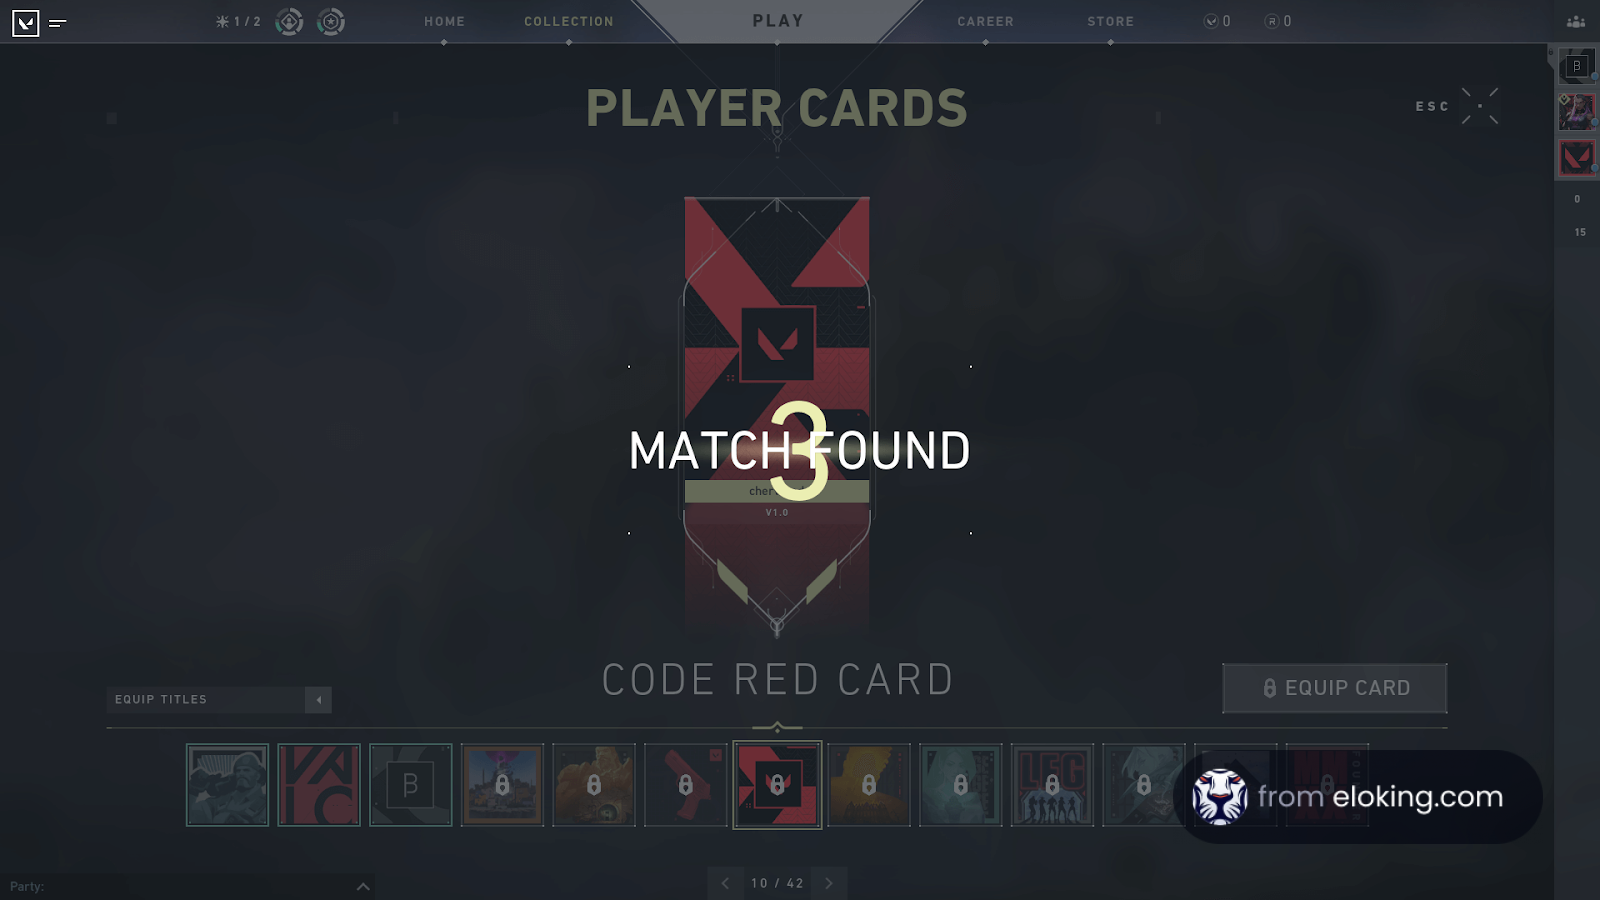 Screenshot of a gaming interface showing 'Match Found' with player cards